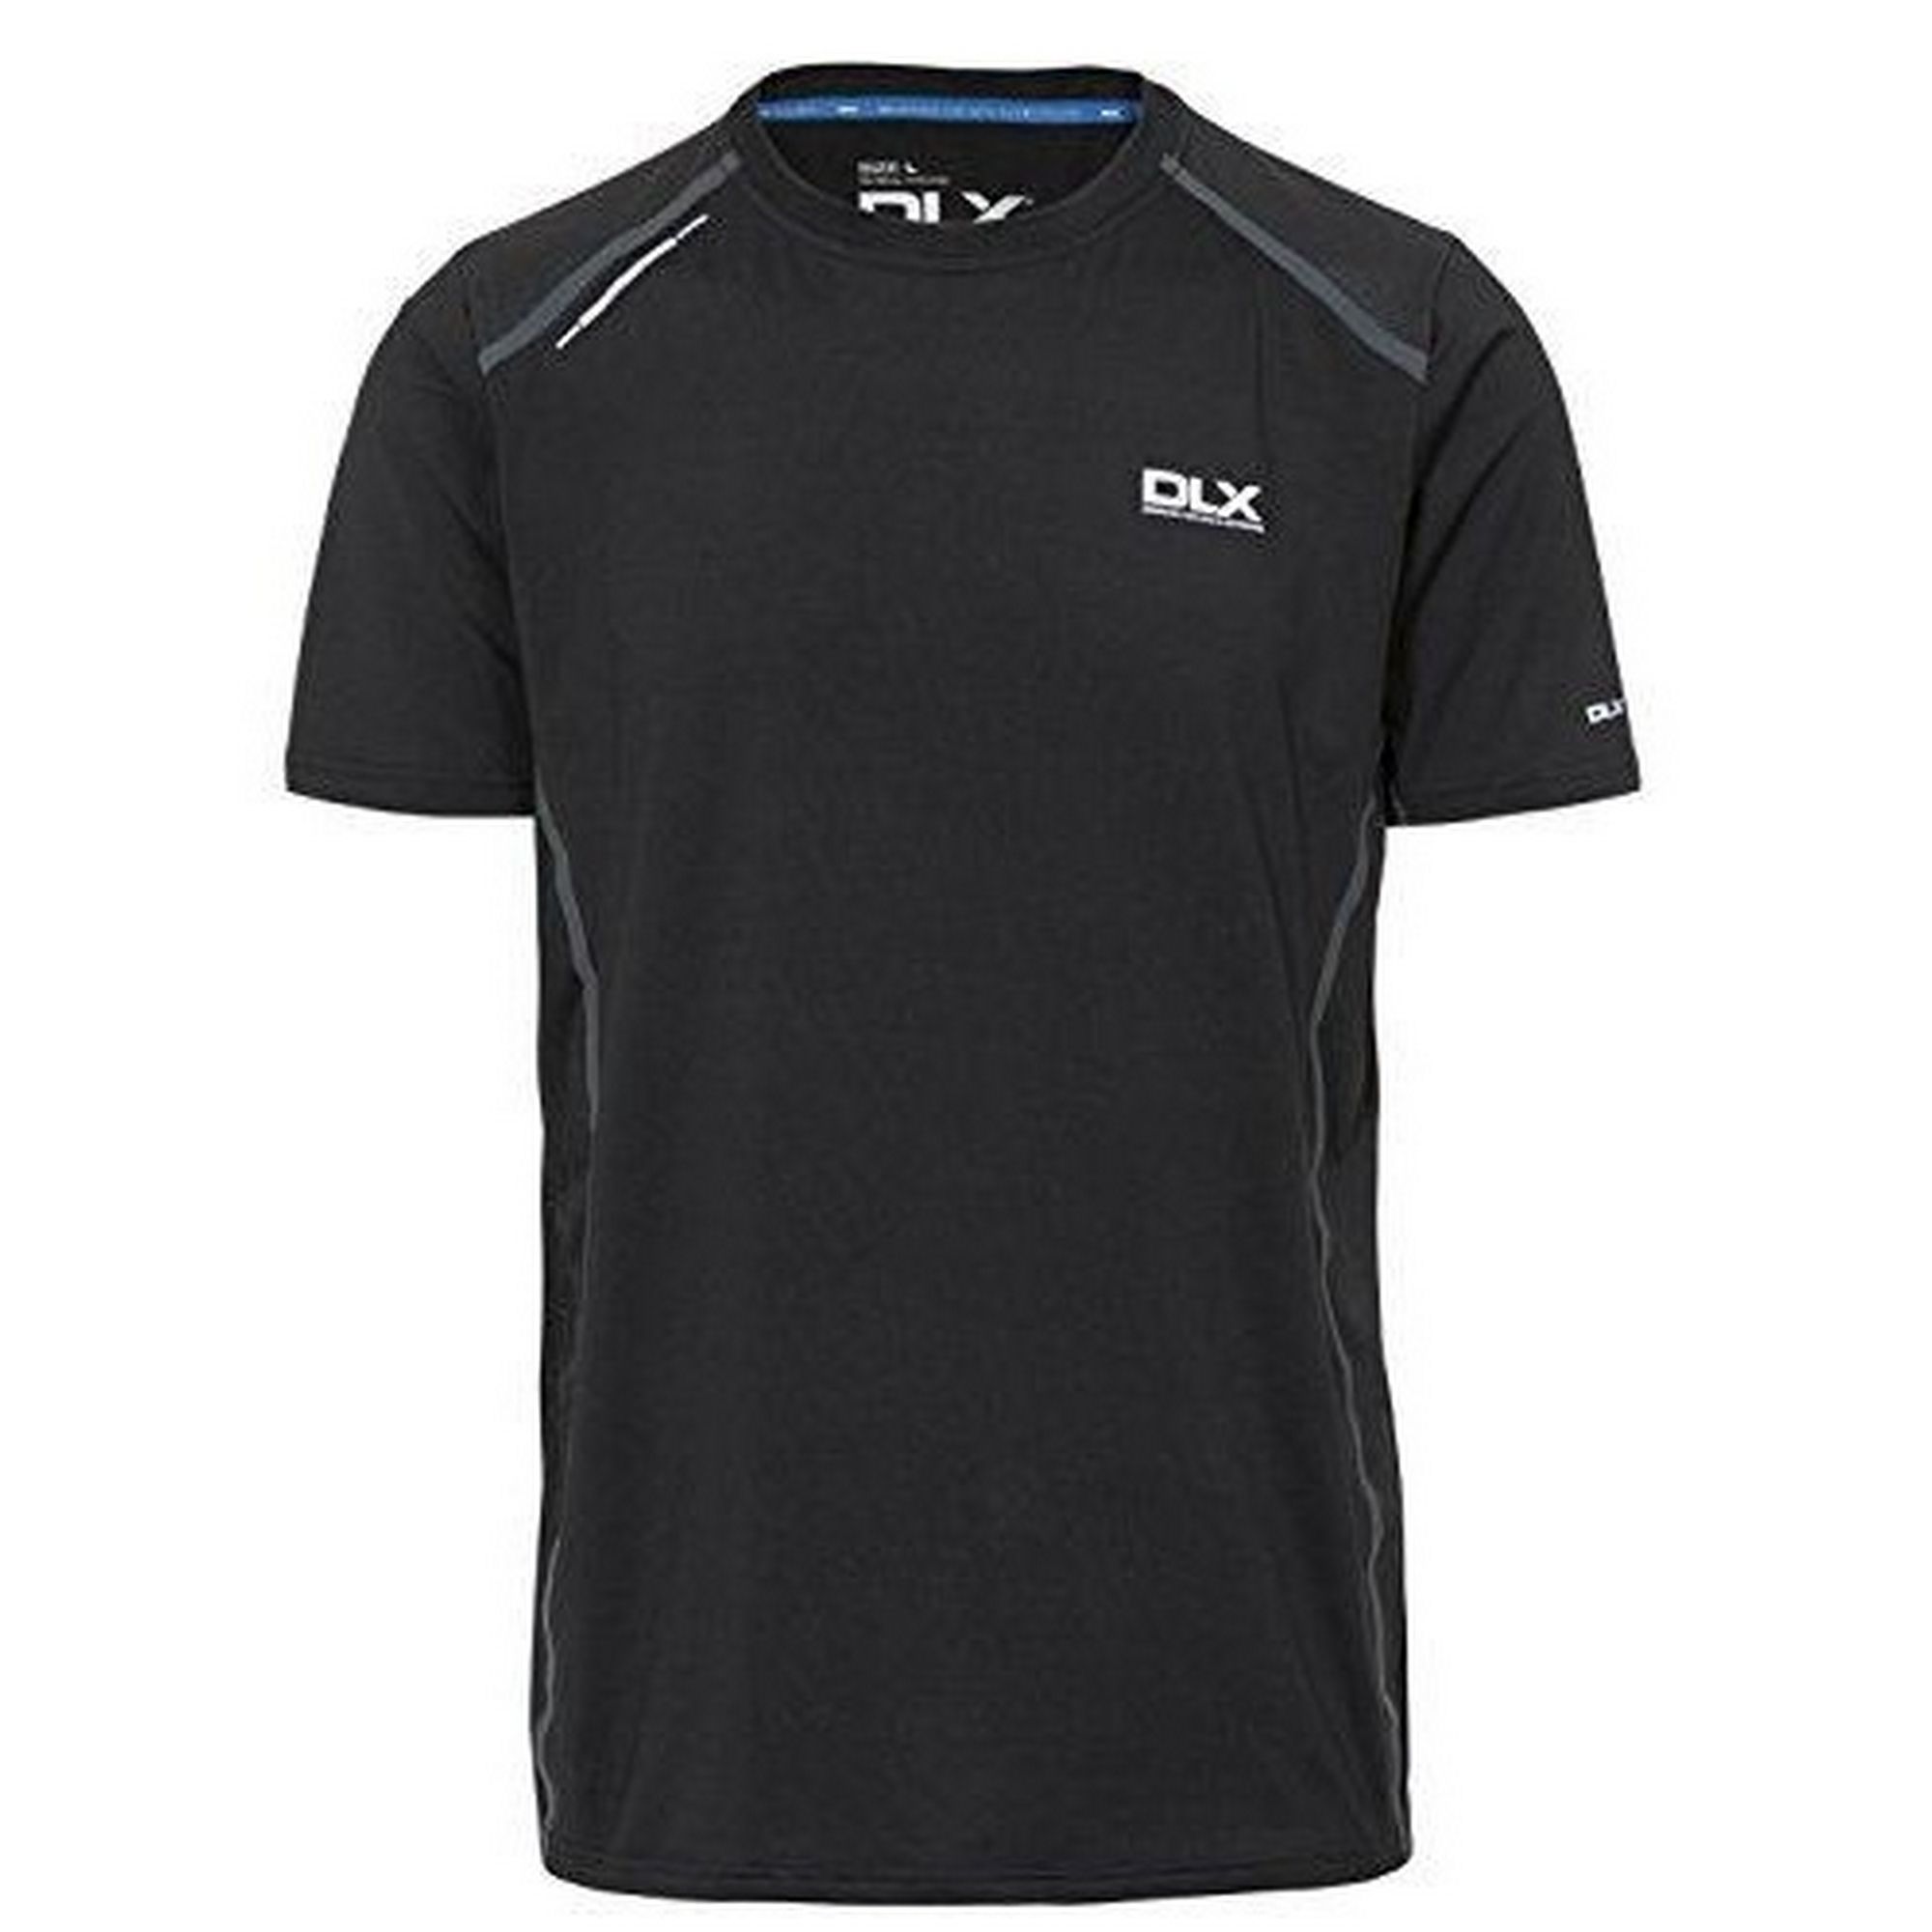 Short sleeves. Round neck. Contrast mesh panels. Welded tape detail. Reflective prints and logos. Wicking. Quick dry. Main: 88% Polyester/12% Elastane, Mesh: 100% Polyester. Trespass Mens Chest Sizing (approx): S - 35-37in/89-94cm, M - 38-40in/96.5-101.5cm, L - 41-43in/104-109cm, XL - 44-46in/111.5-117cm, XXL - 46-48in/117-122cm, 3XL - 48-50in/122-127cm.